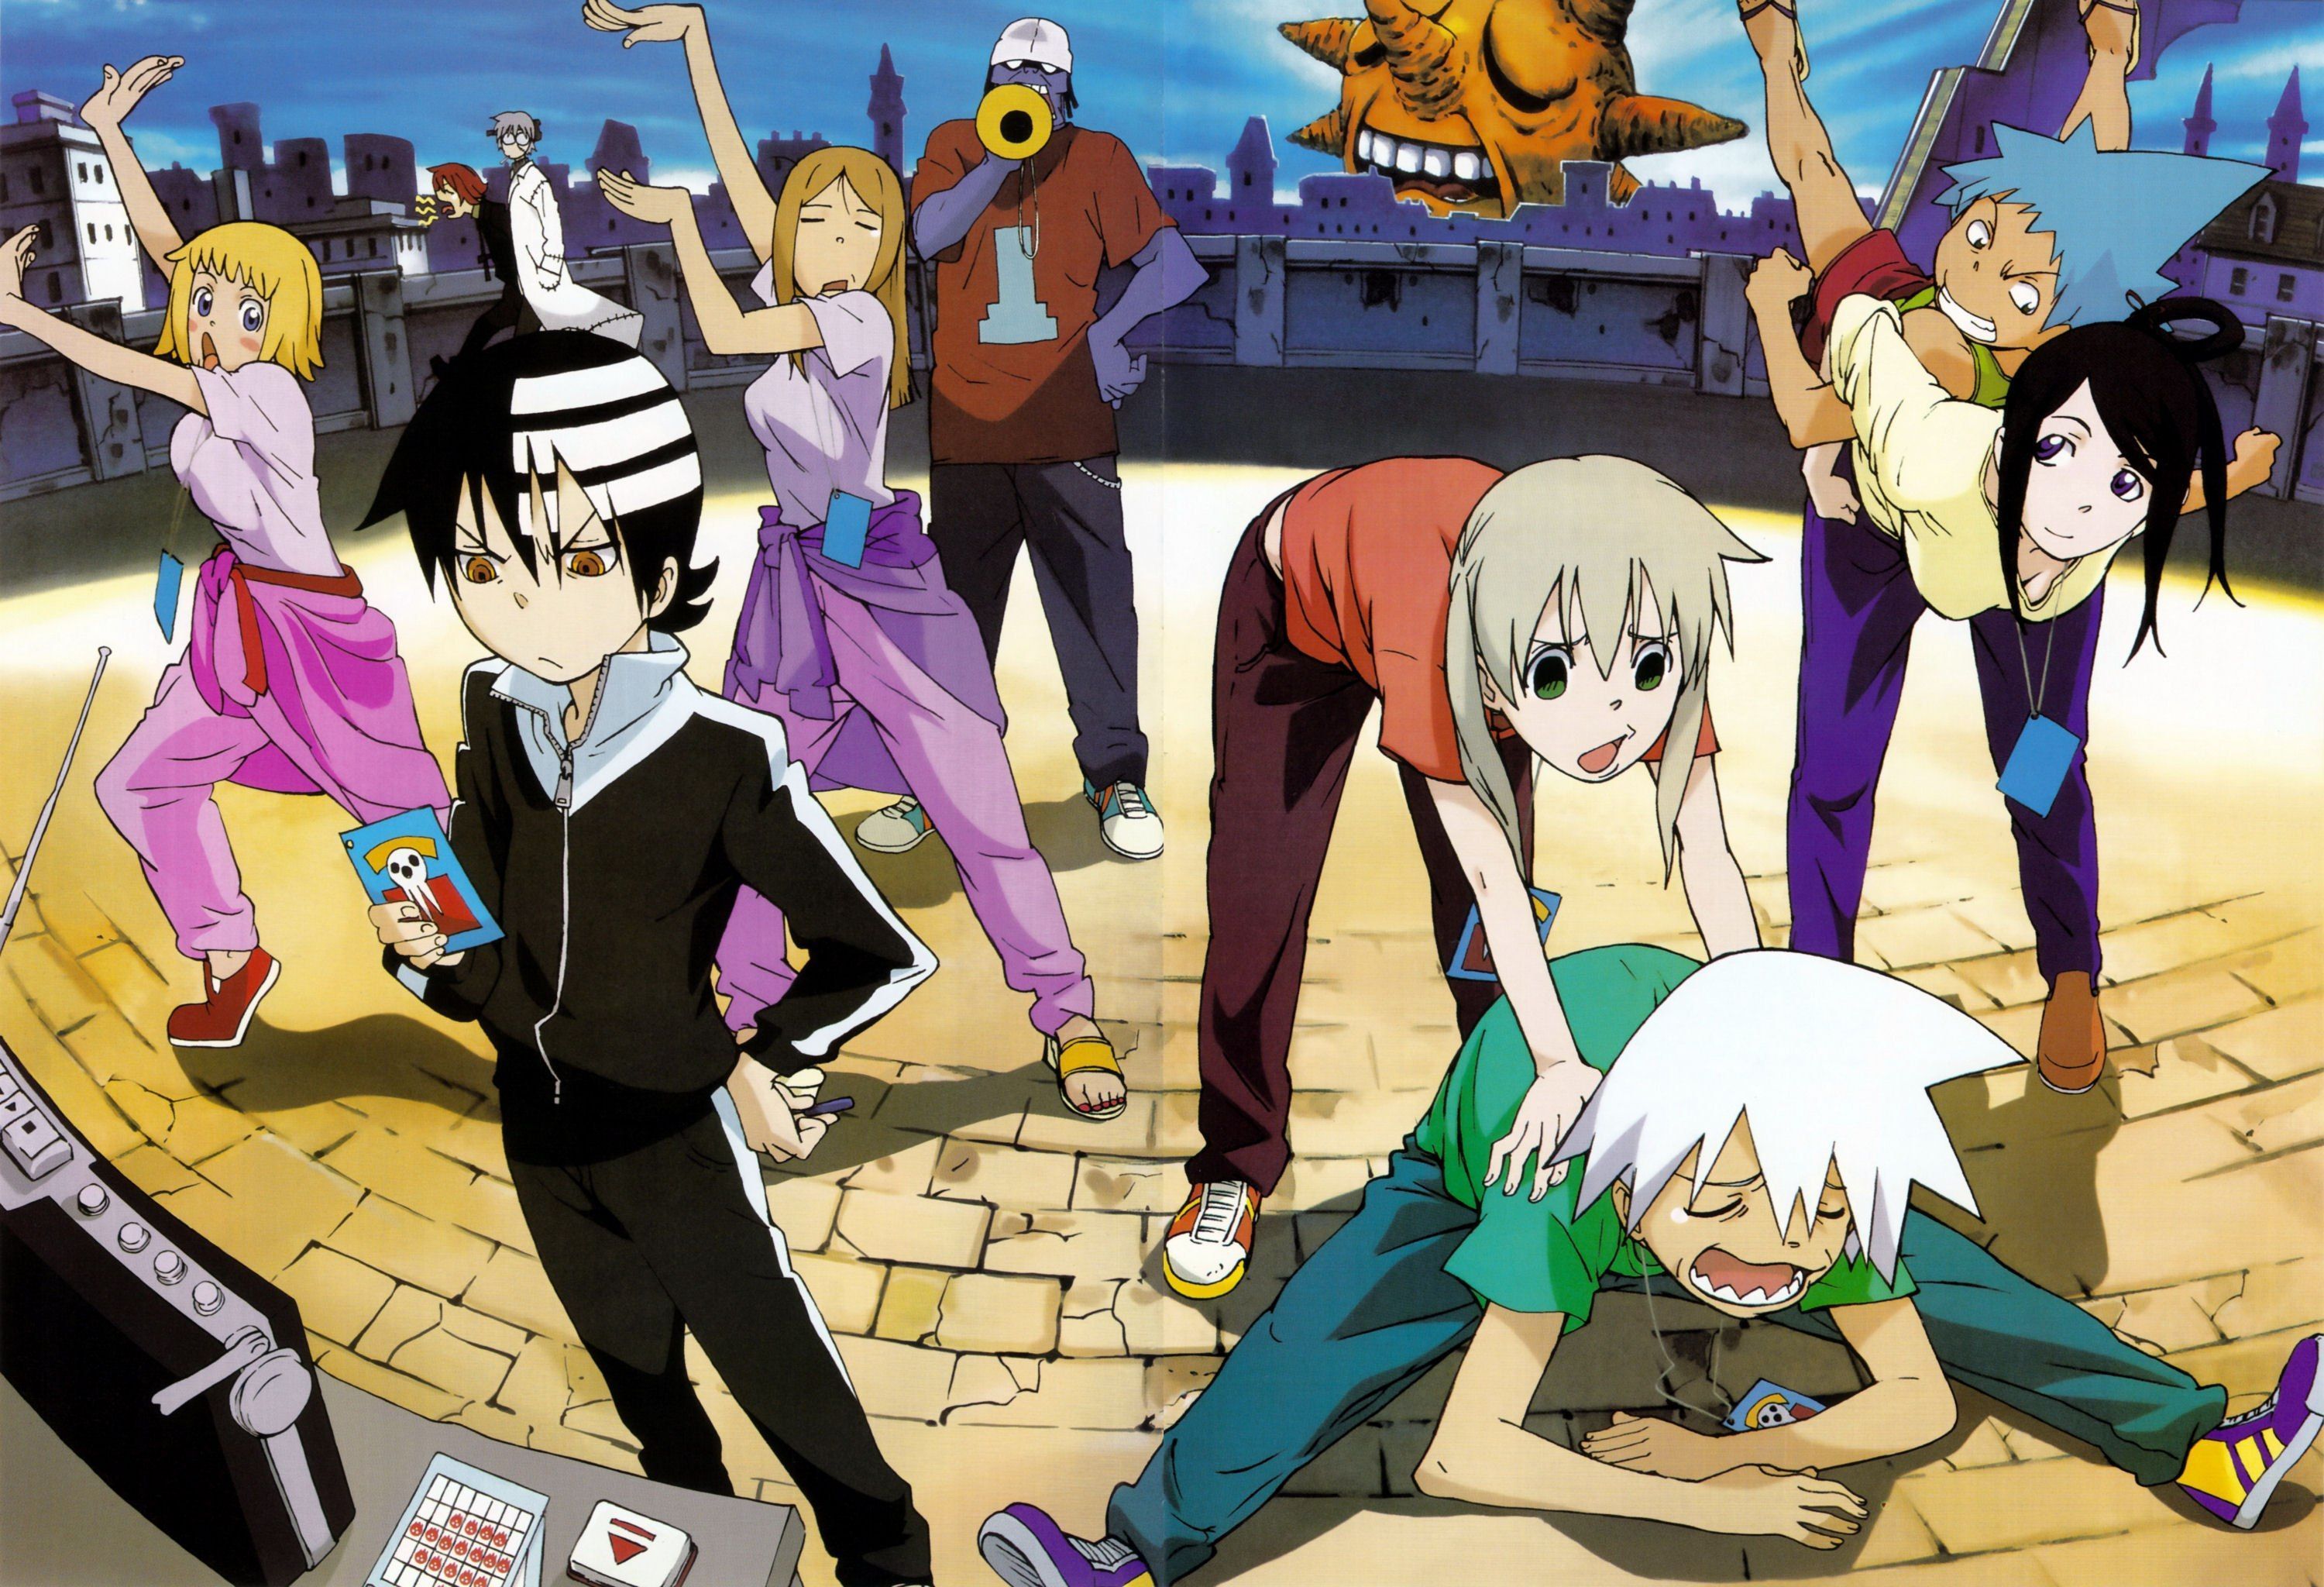 soul eater wallpaper all characters